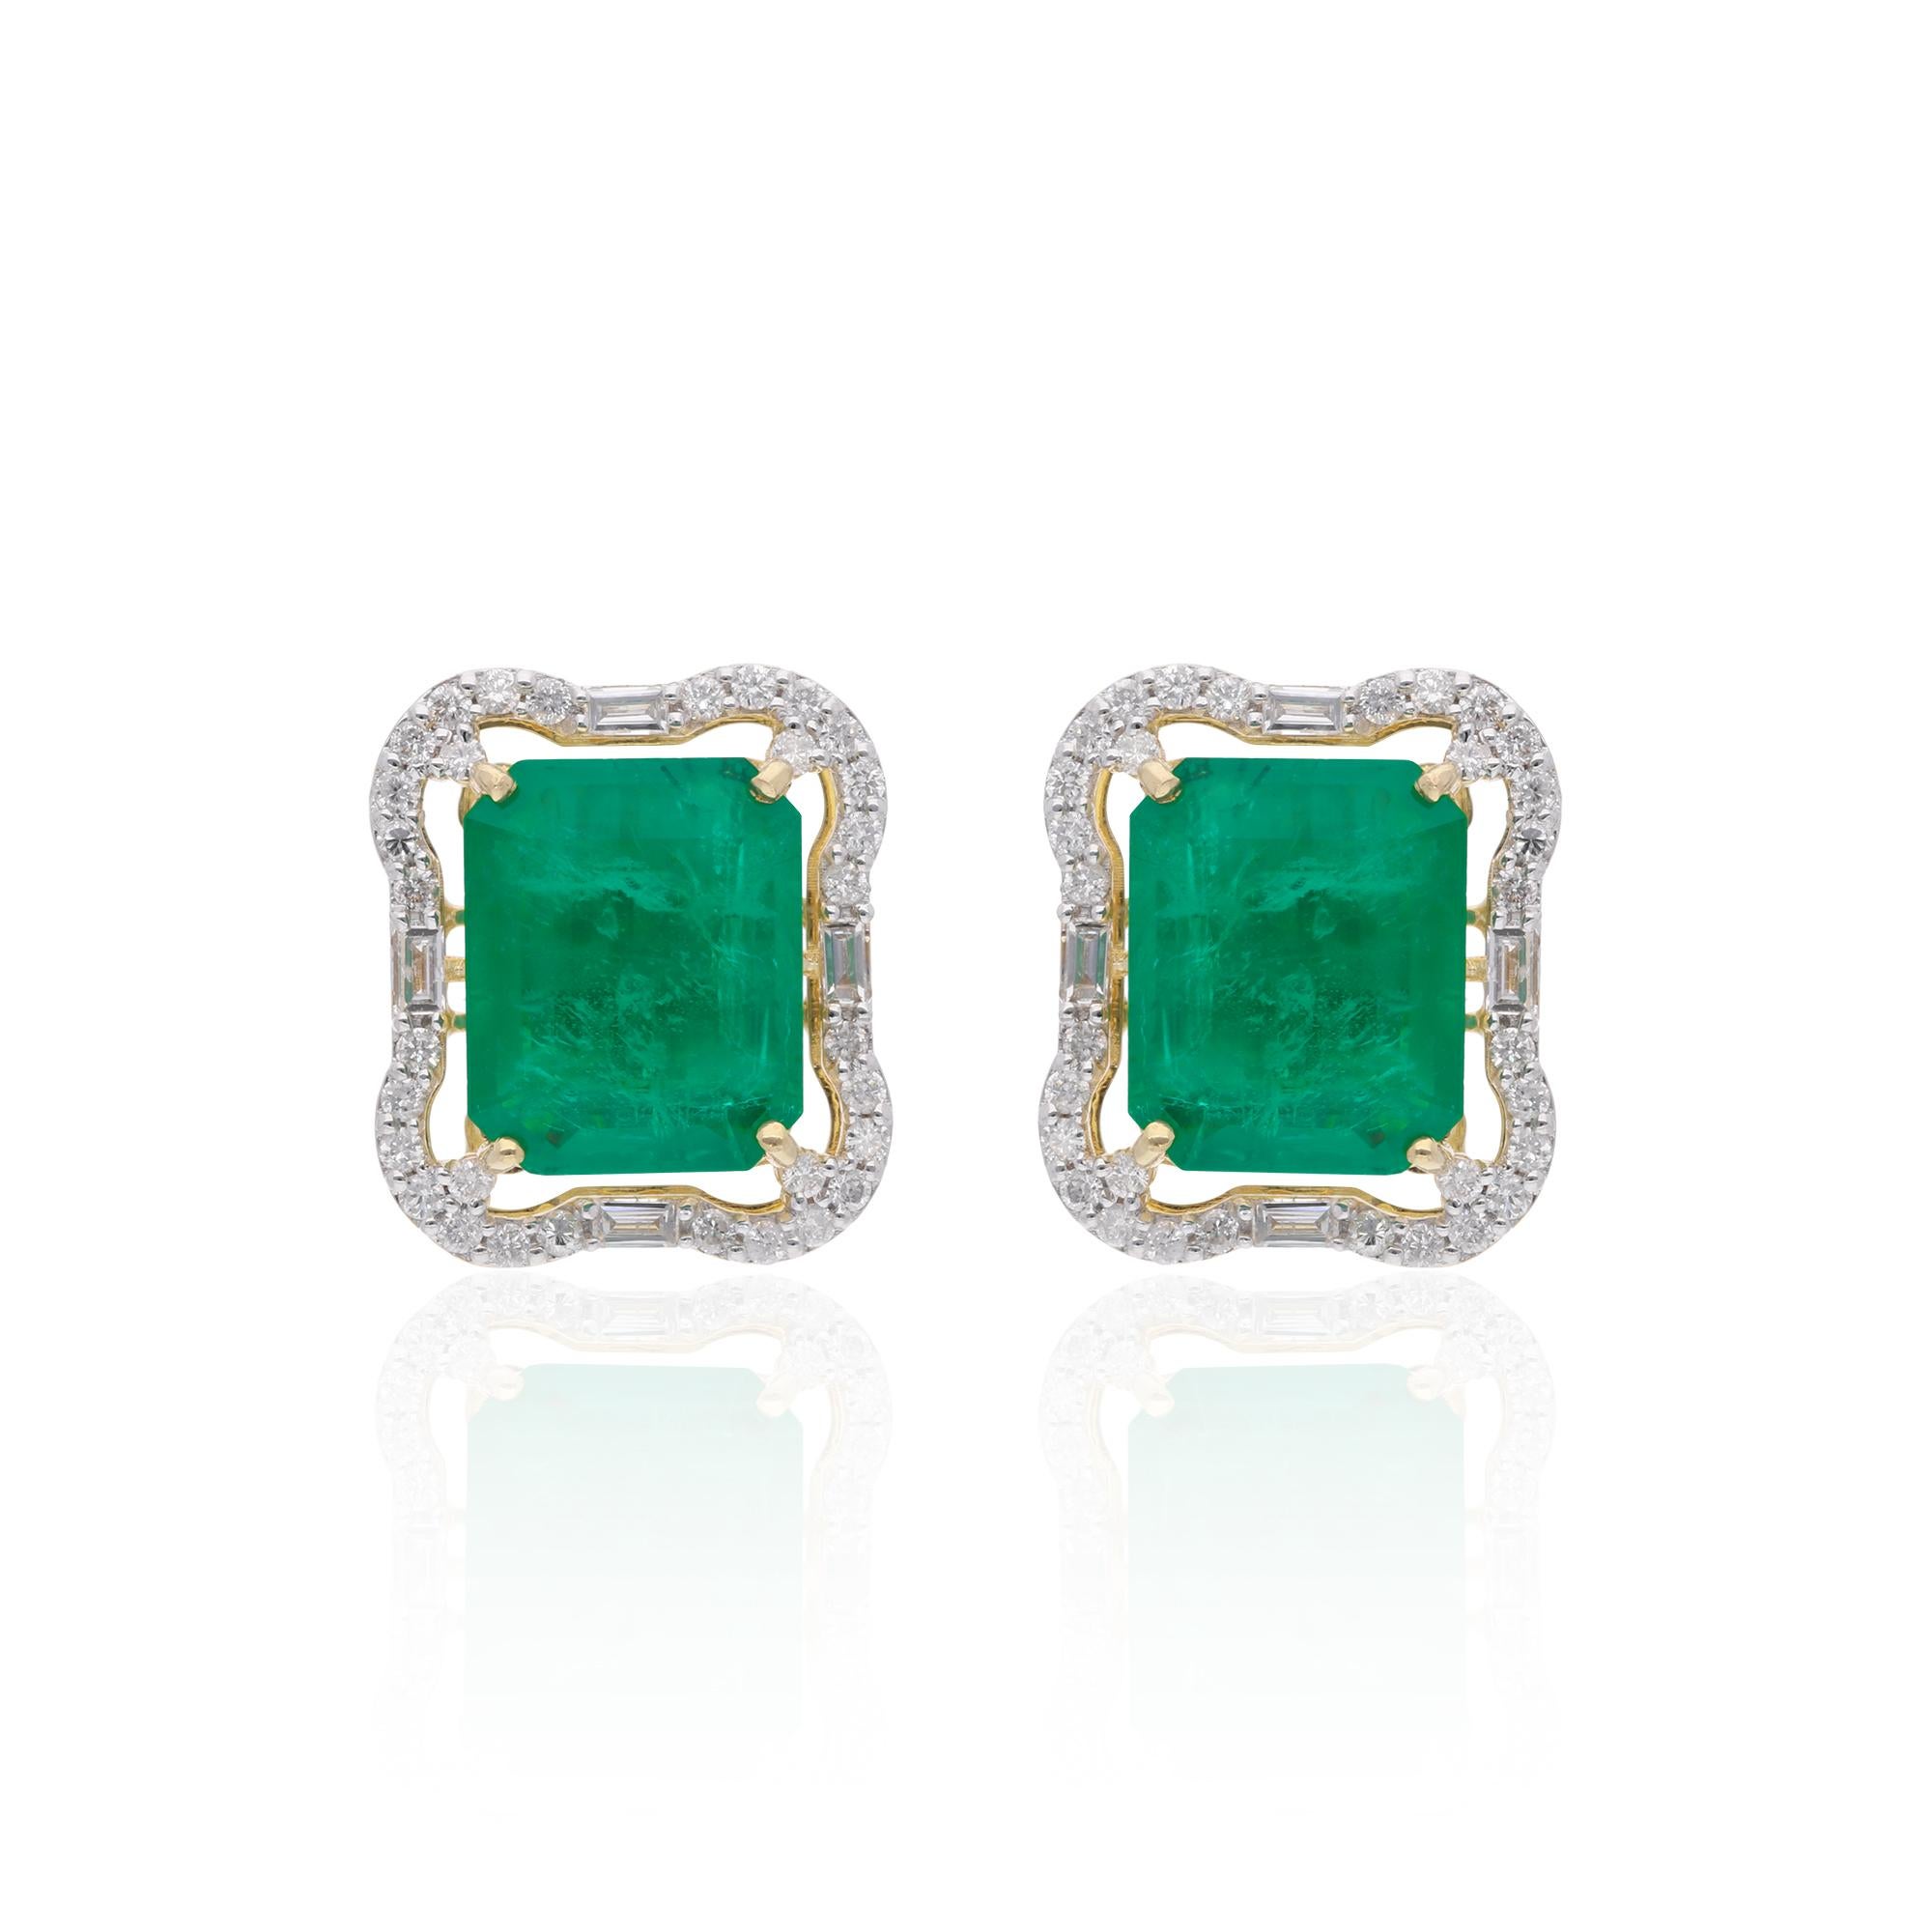 Item Code :- SEE-13975
Gross Wt. :- 6.60 gm
Solid 18k Yellow Gold Wt. :- 4.82 gm
Natural Diamond Wt. :- 0.68 Ct. ( AVERAGE DIAMOND CLARITY SI1-SI2 & COLOR H-I )
Emerald Wt. :- 8.22 Ct.
Earrings Size :- 14 x 17 mm approx.

✦